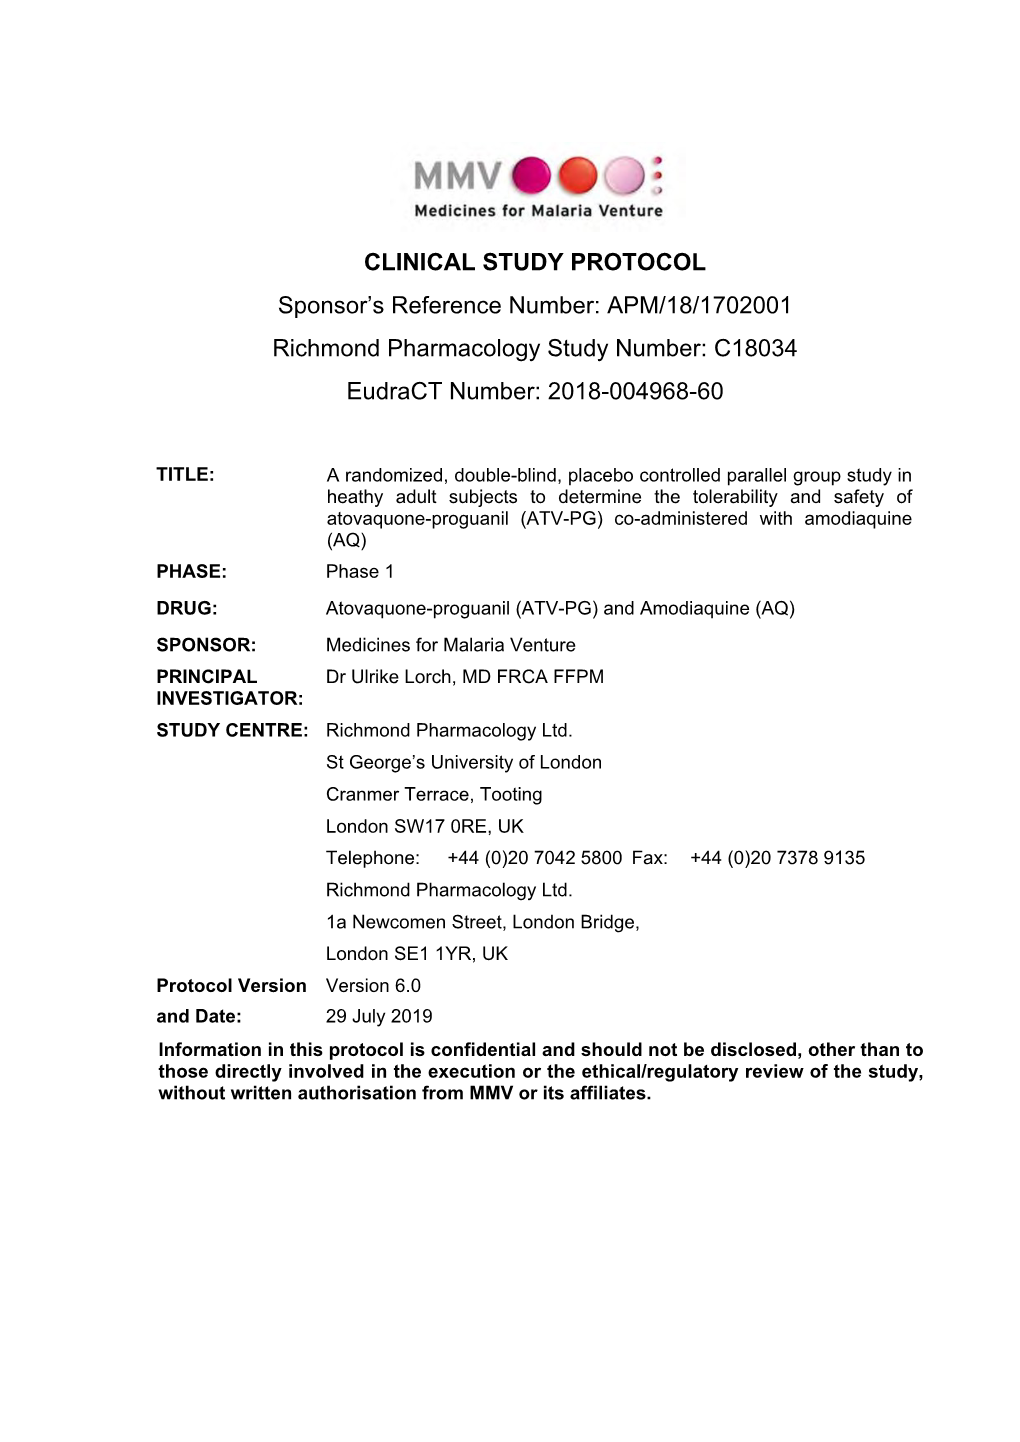 STUDY PROTOCOL Sponsor’S Reference Number: APM/18/1702001 Richmond Pharmacology Study Number: C18034 Eudract Number: 2018-004968-60